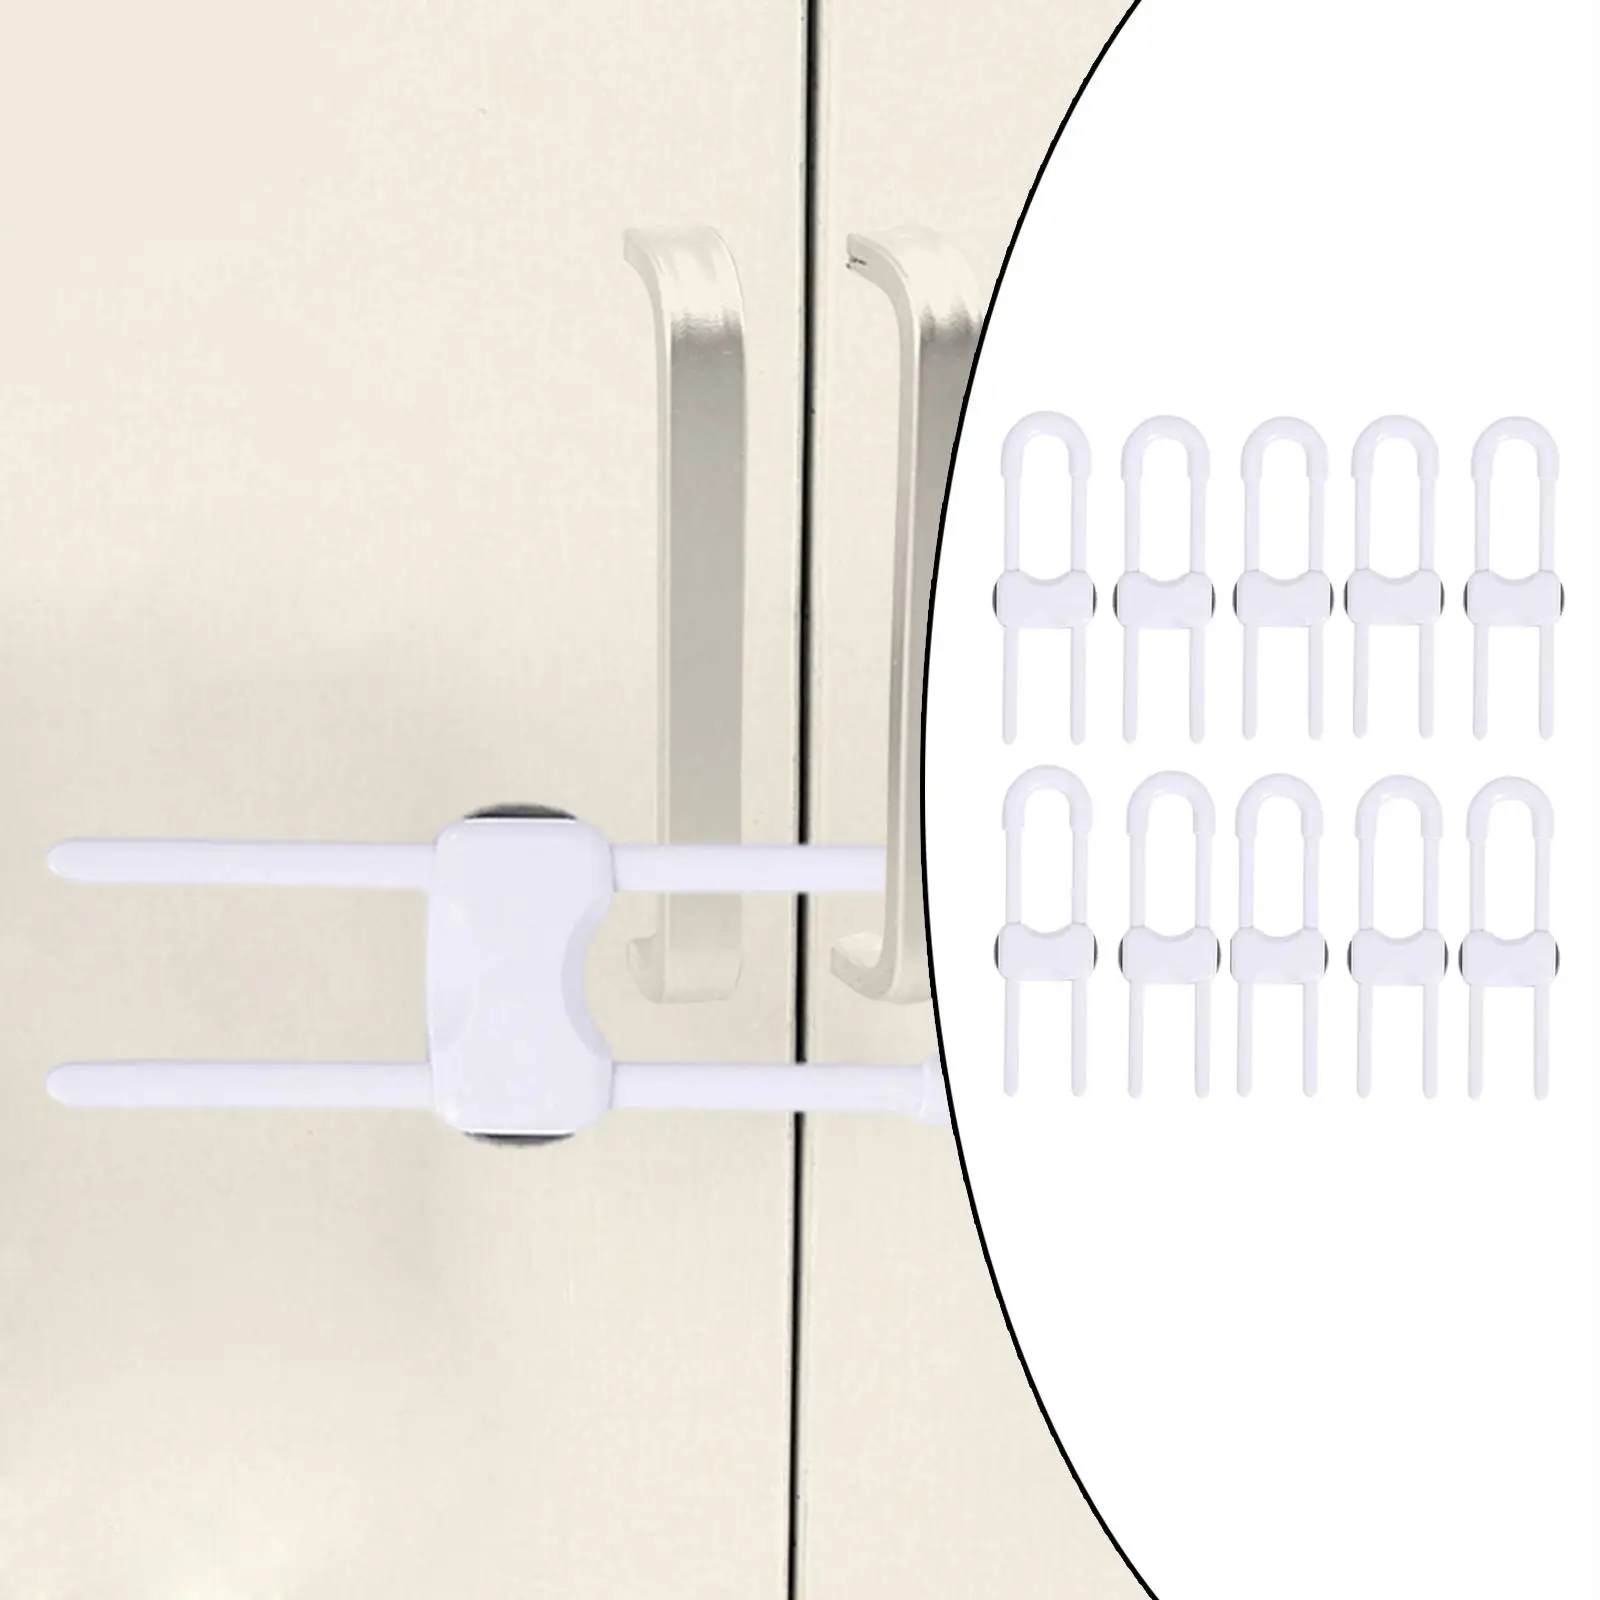 10 Pieces Baby Proofing latches White U-Shaped Sliding Cabinet Locks for Handles Cupboard Drawers Fridge Doors Cabinet